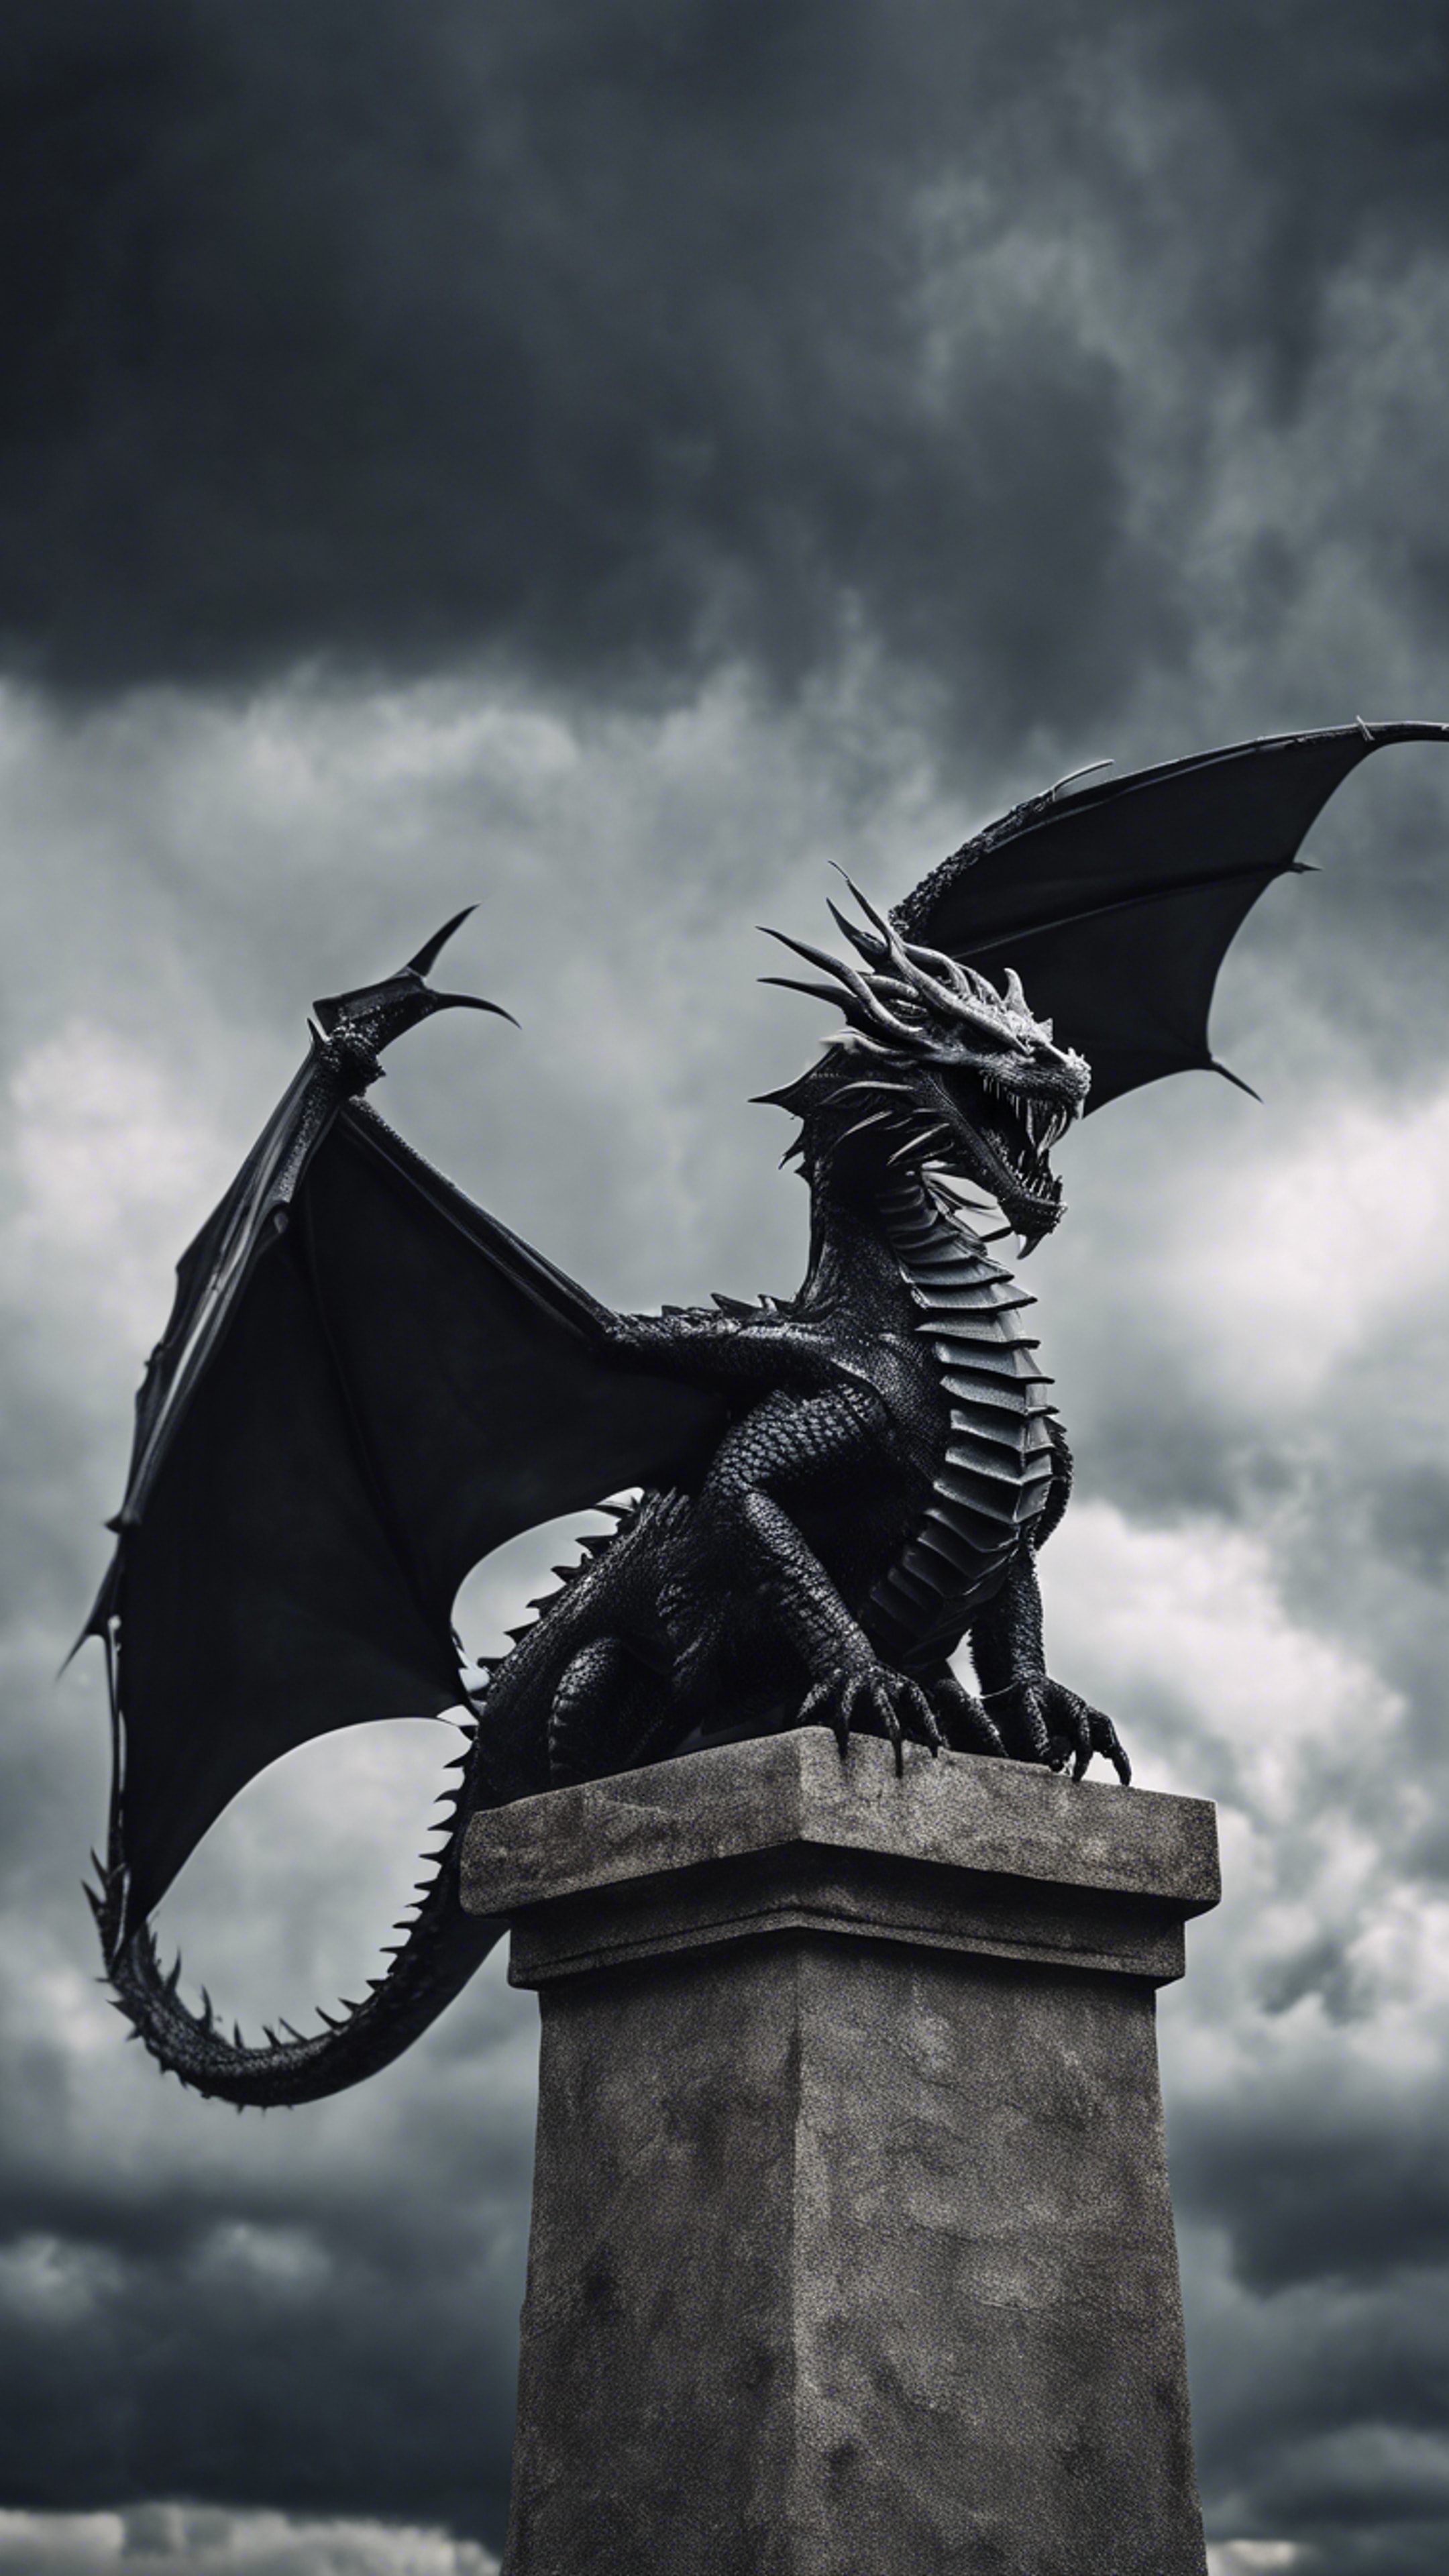 A gothic-style, black iron dragon flying amidst stormy, dark clouds. Tapetai[aebeaee8cf654a26baba]